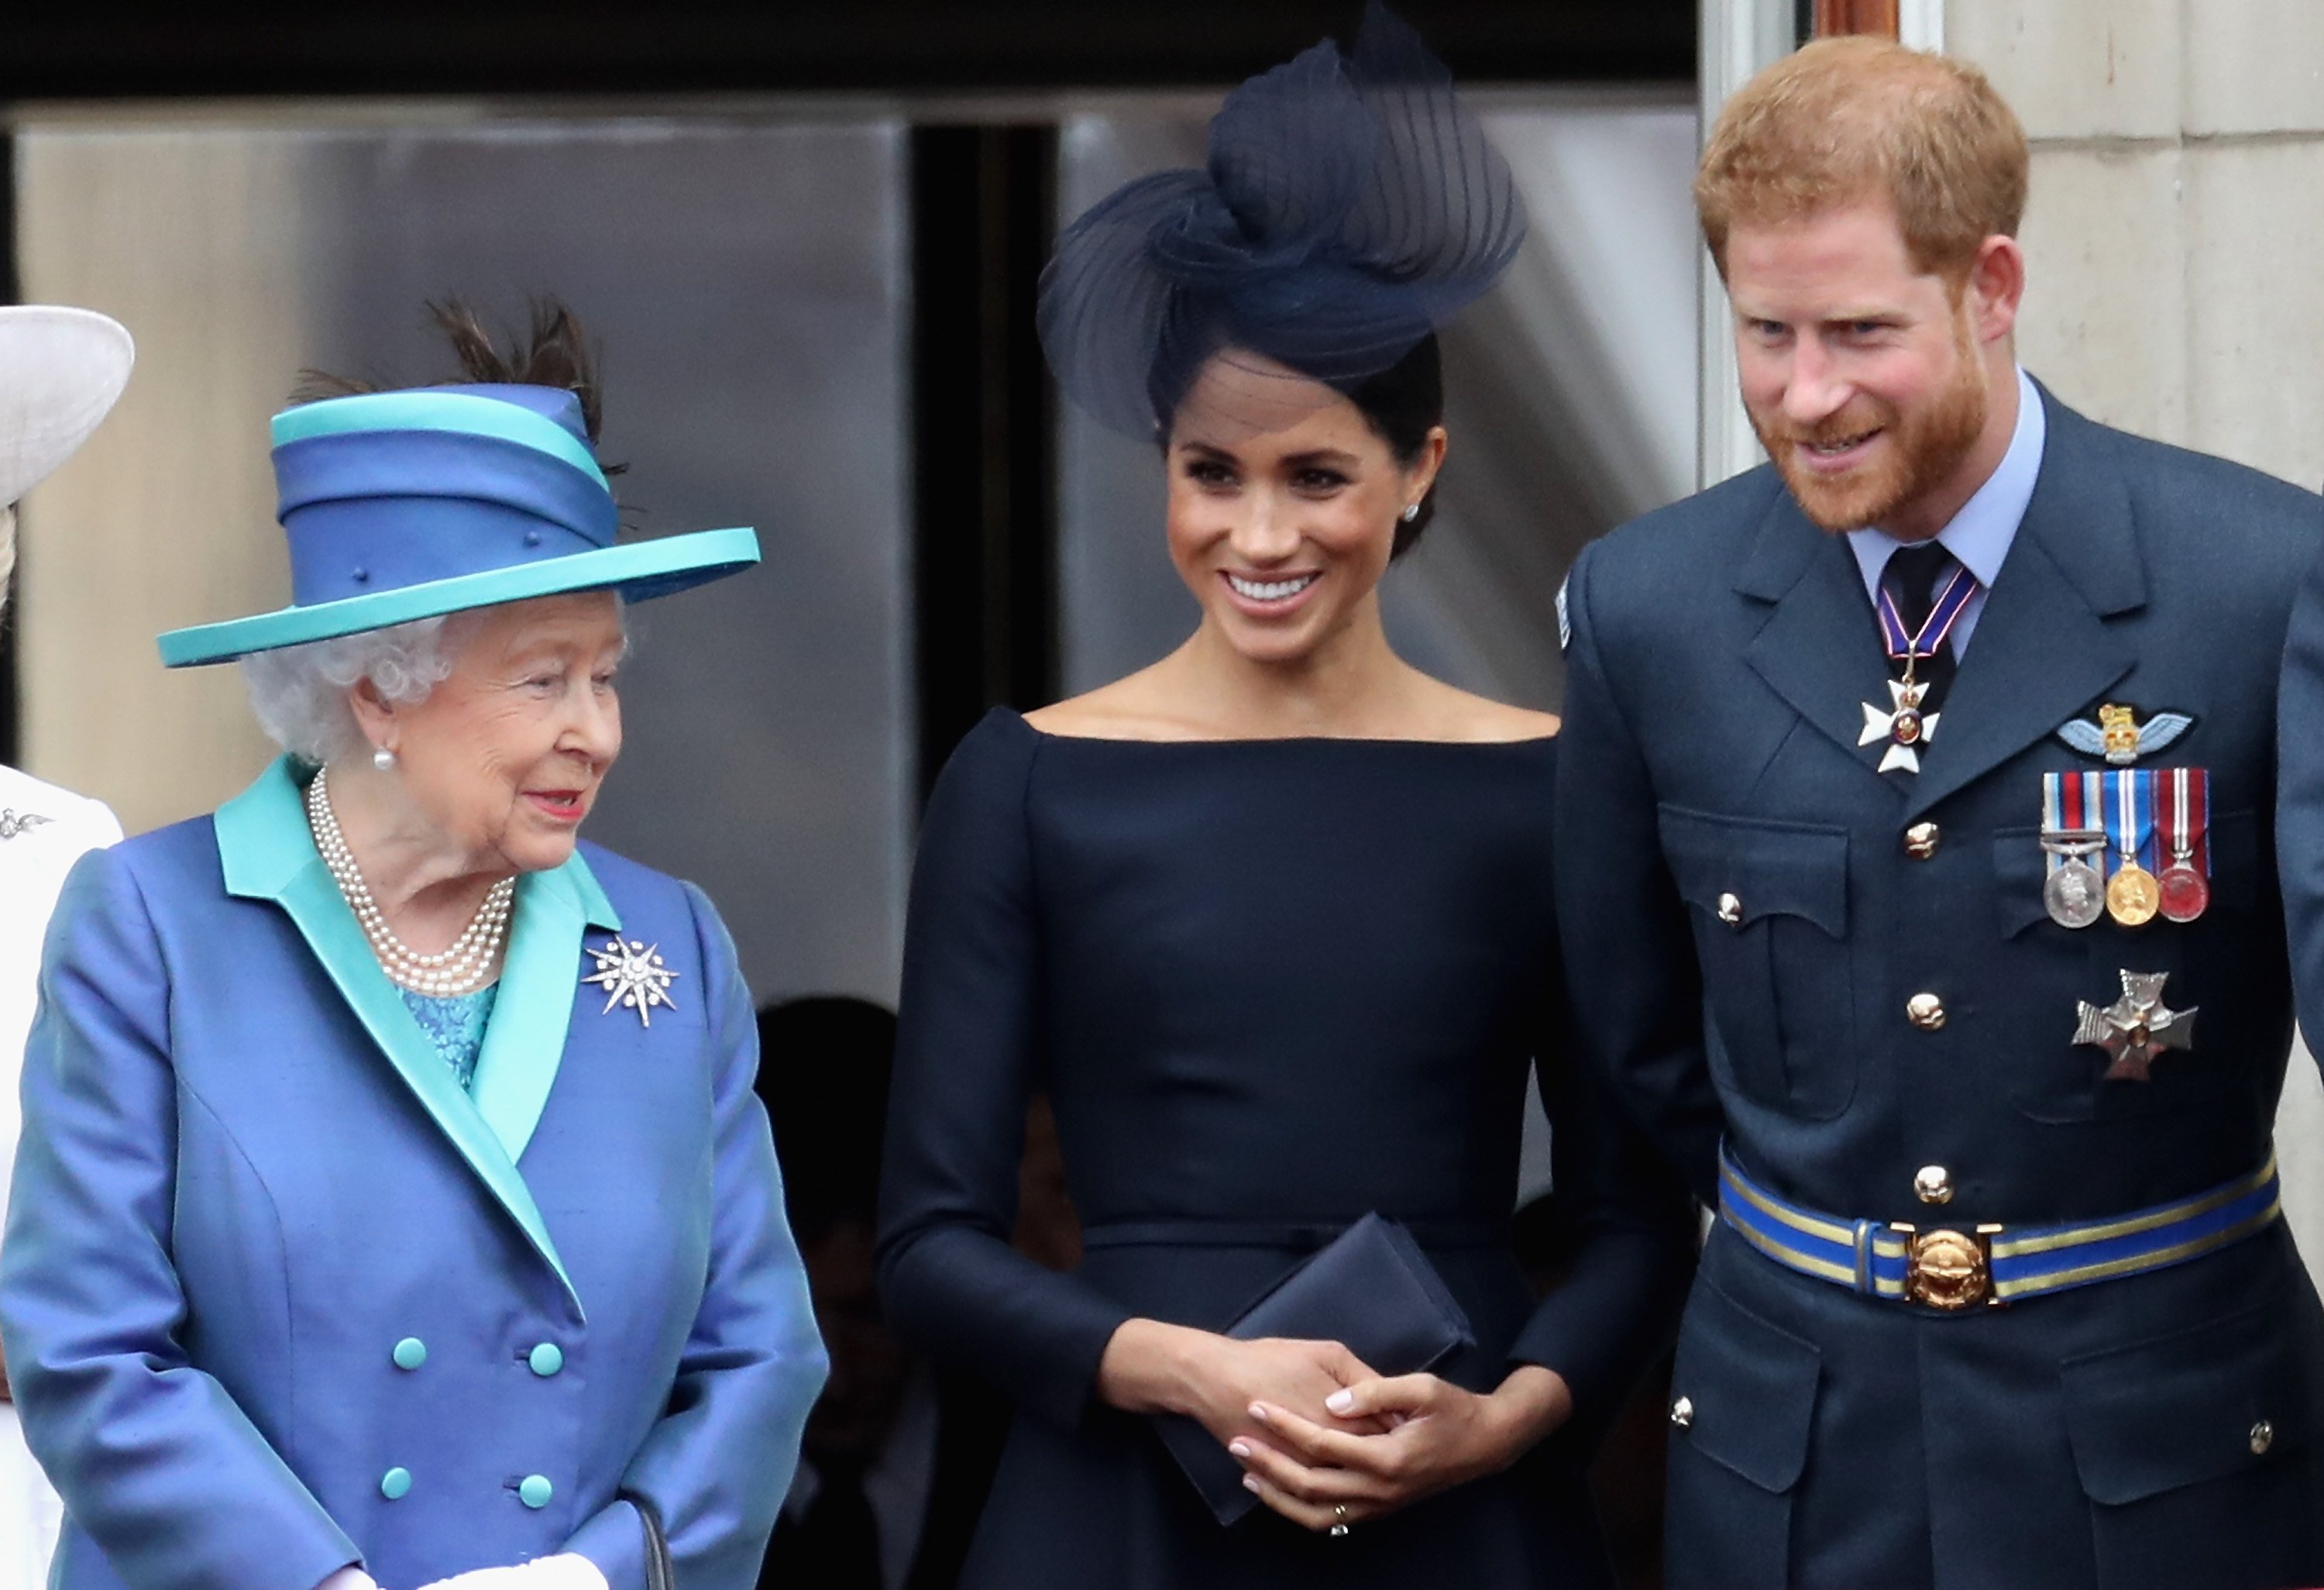 Queen Elizabeth II with Meghan Markle and Prince Harry watching the RAF flypast on the balcony of Buckingham Palace on July 10, 2018 in London, England. / Source: Getty Images